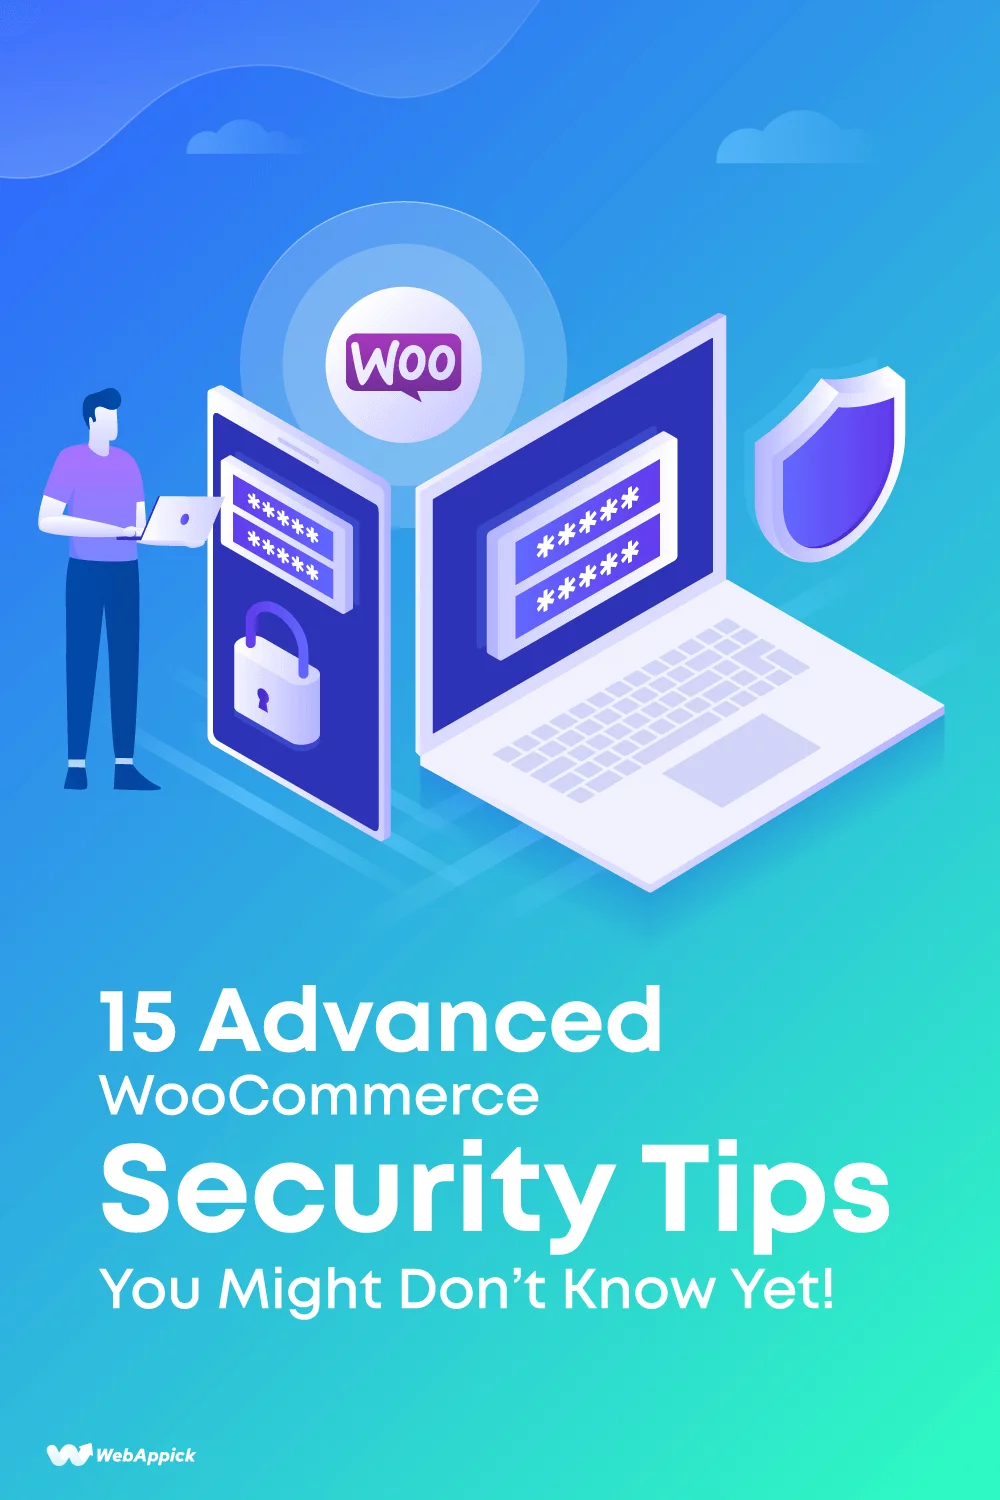 15 Advanced WooCommerce Security Tips You Might Don’t Know Yet!